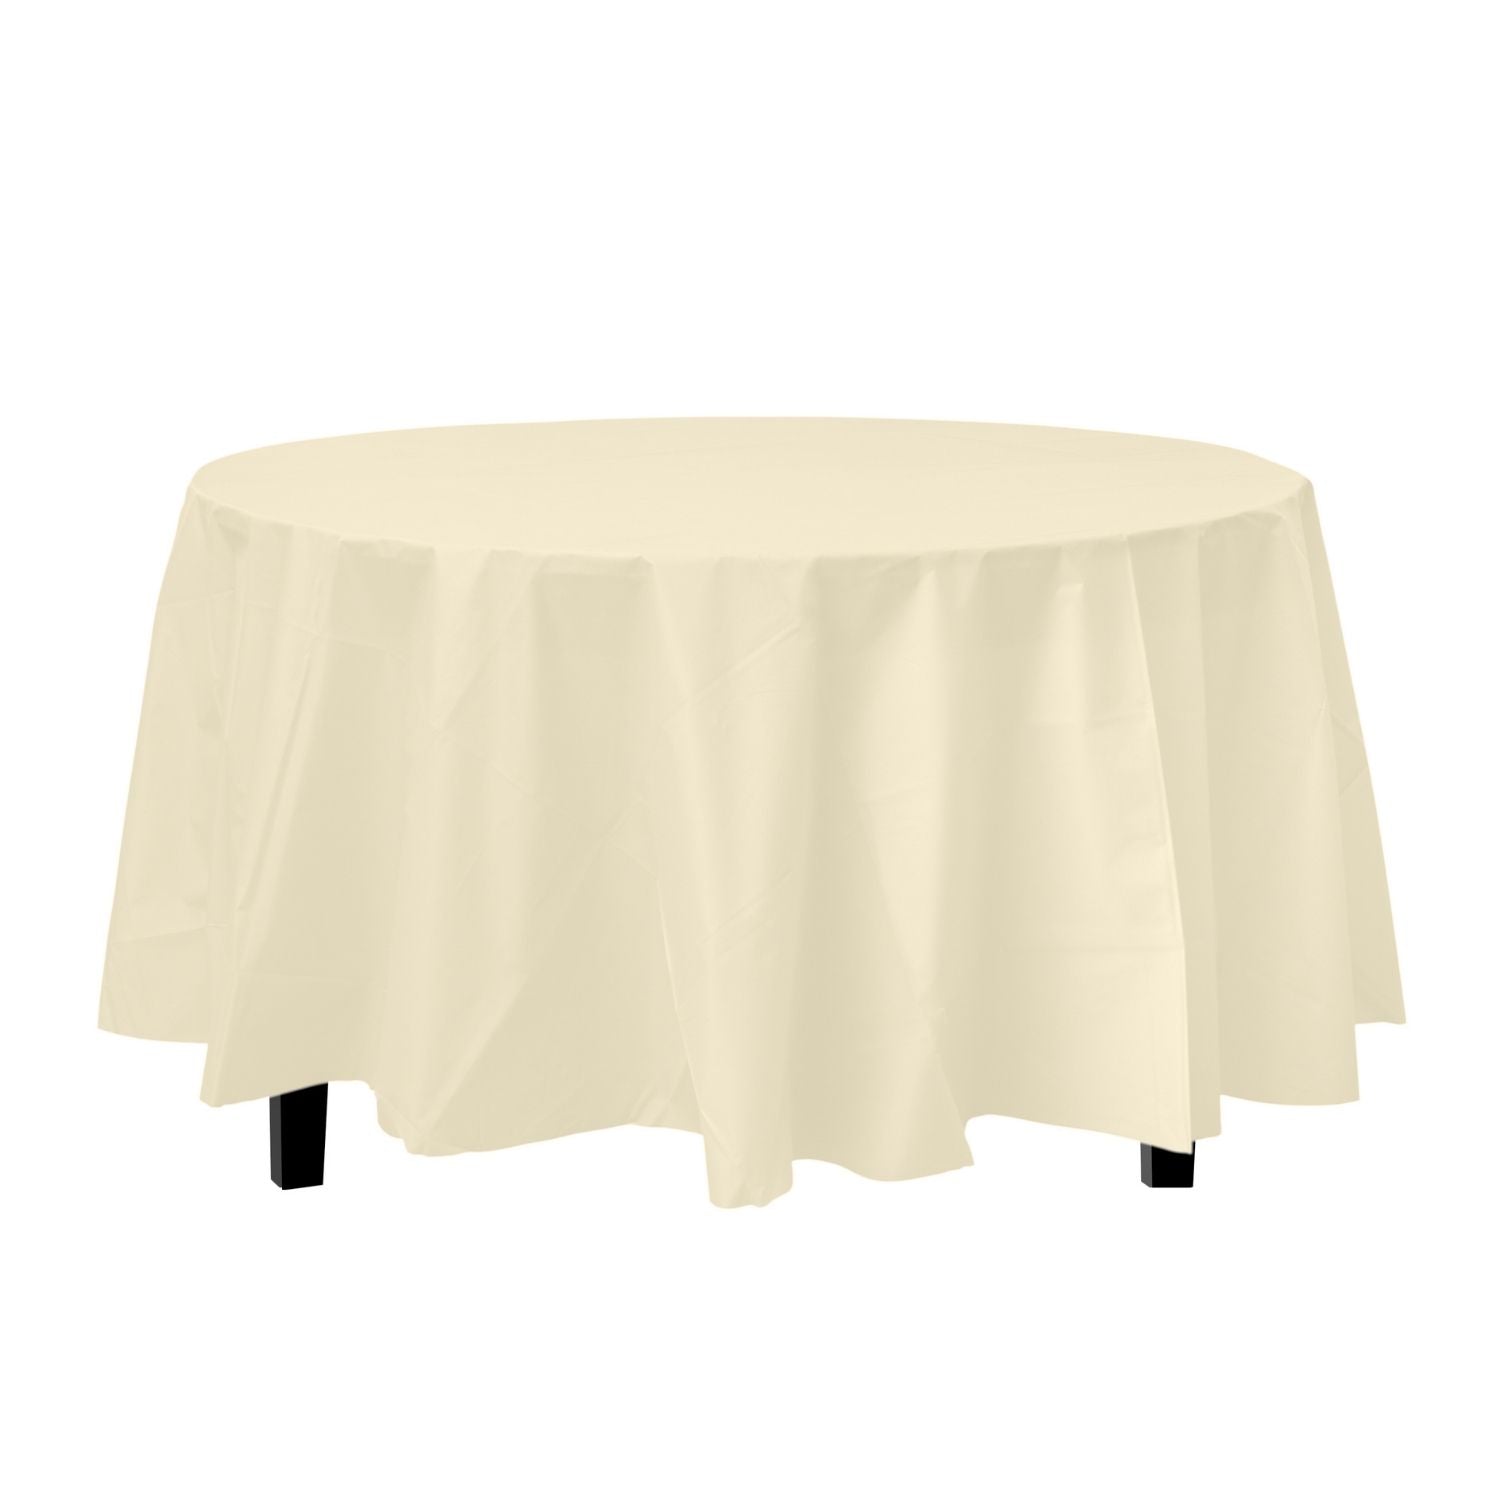 Ivory Round Plastic Tablecloth | 48 Count - Yom Tov Settings